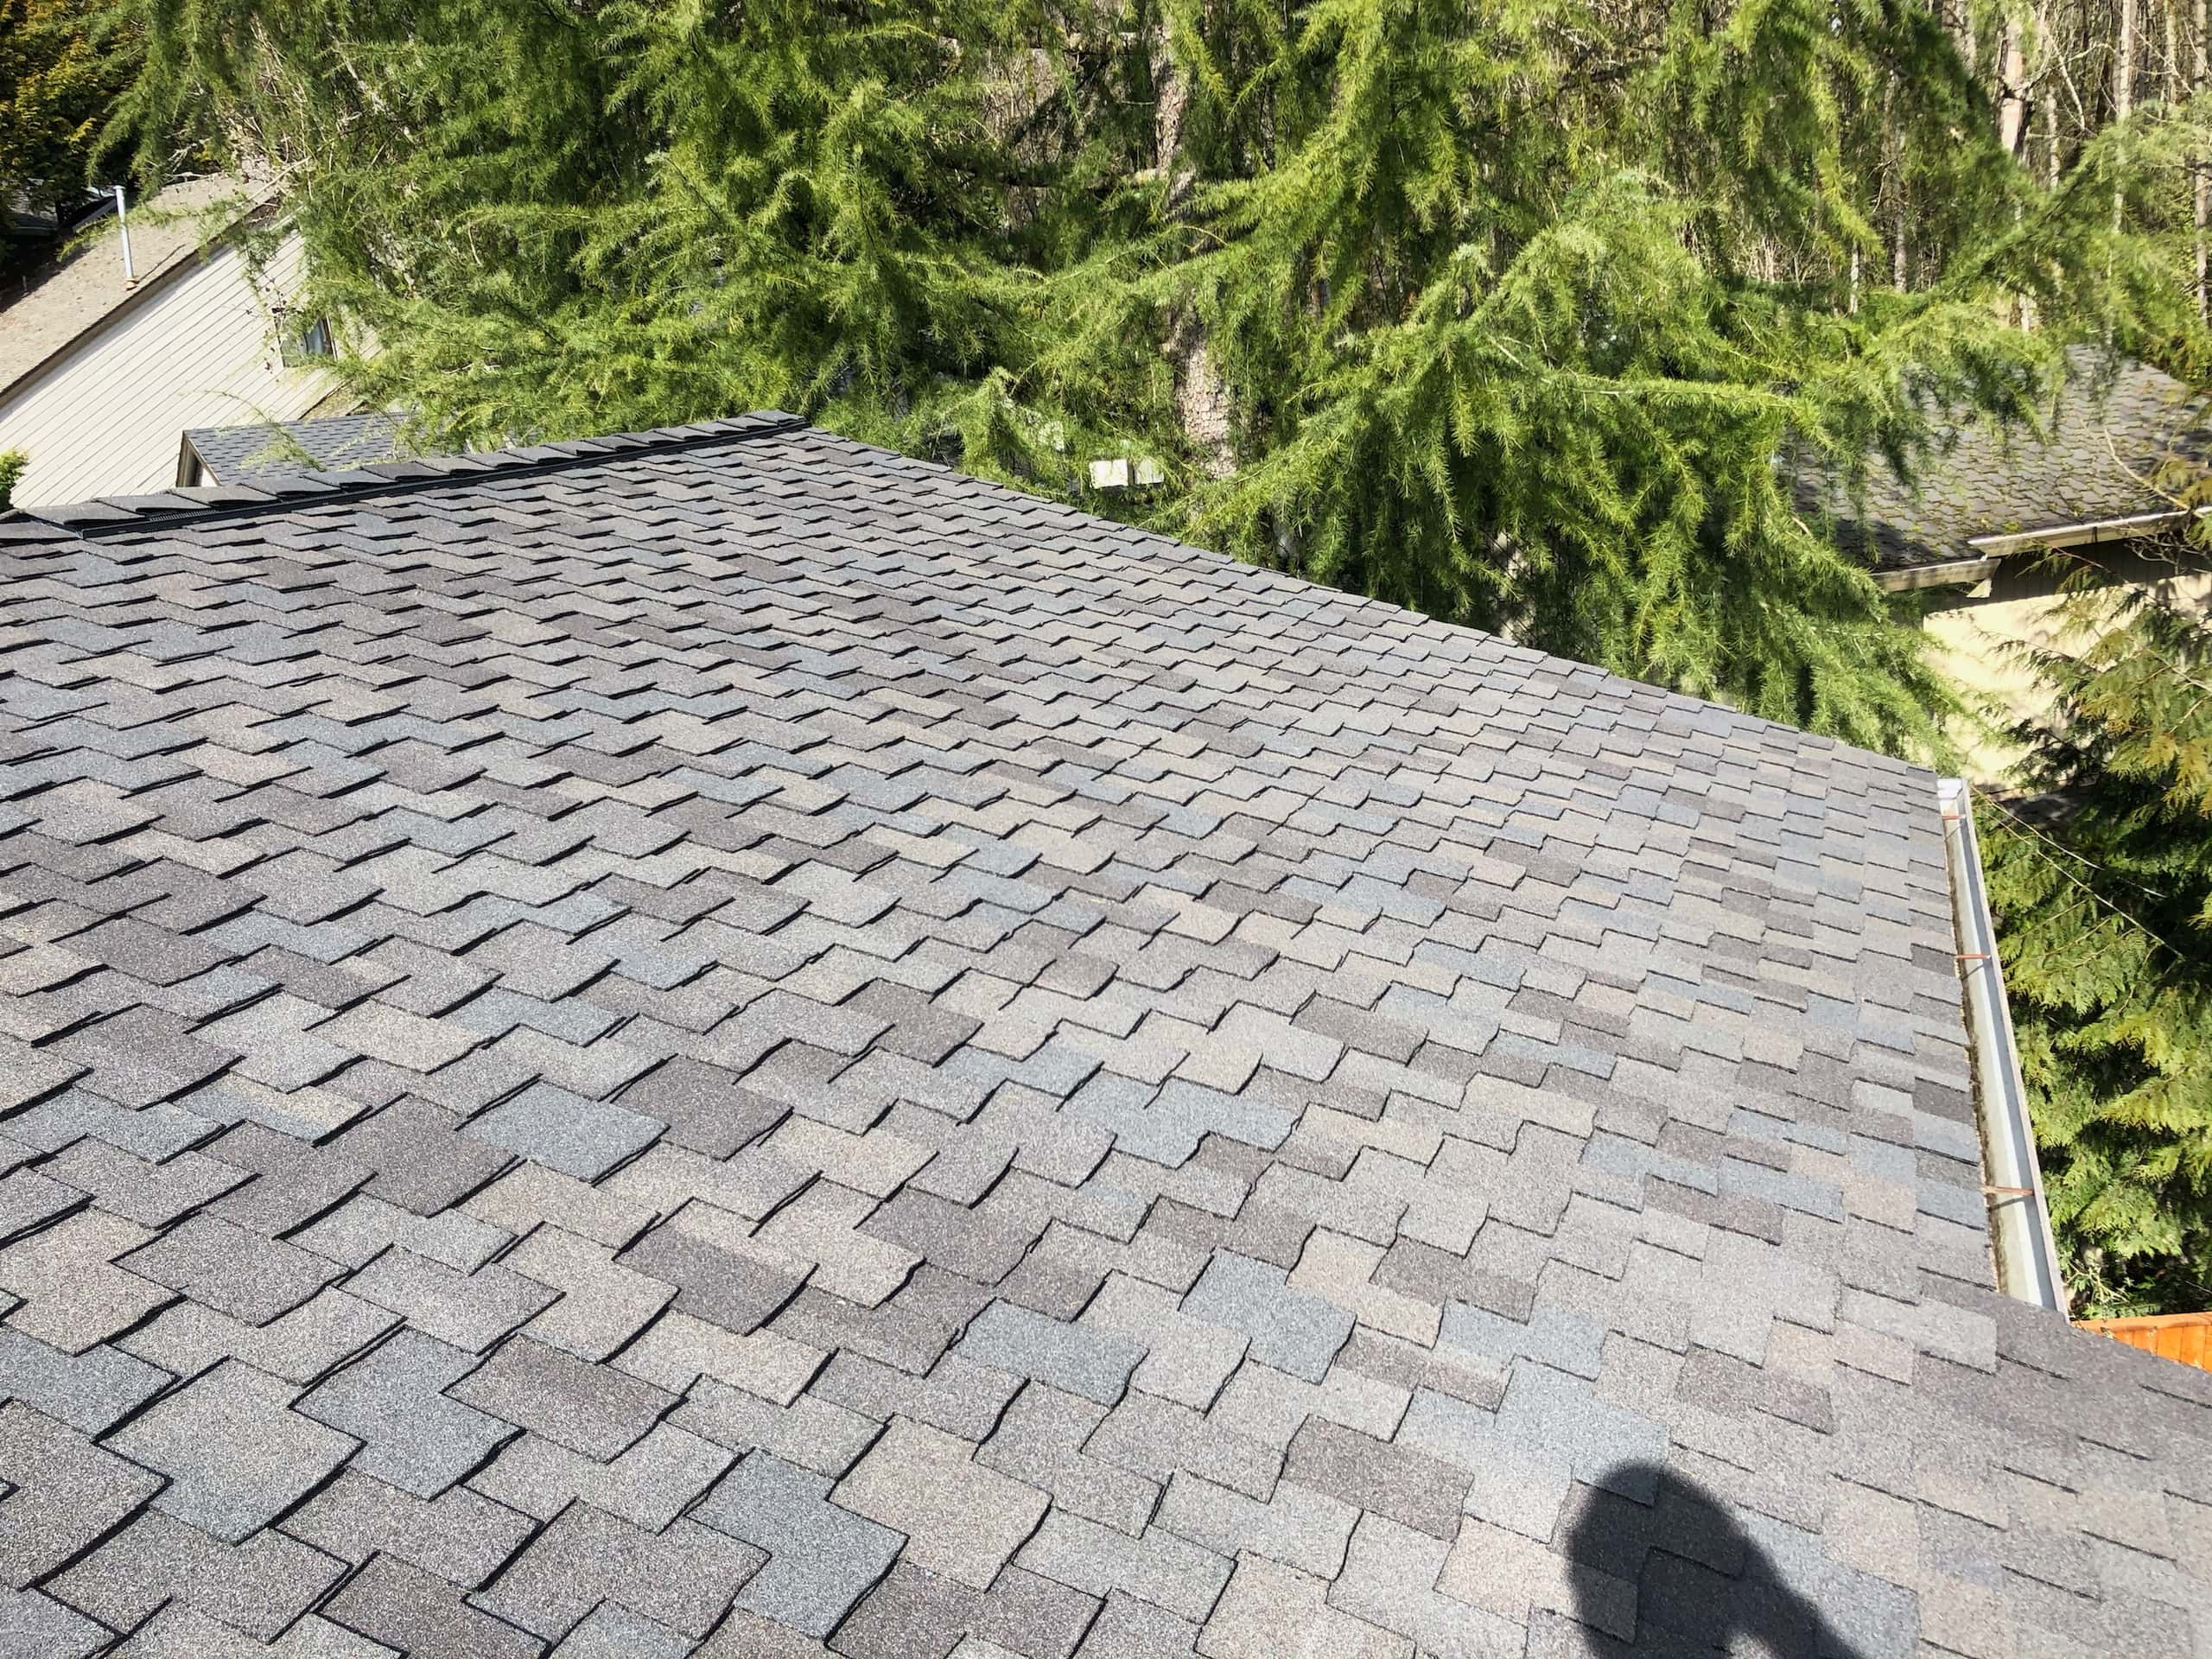 Reliance Roof Pros | West Linn | New Roof | Certainteed Presidential Shake AR in Shadow Gray | Ridge Line Gutters